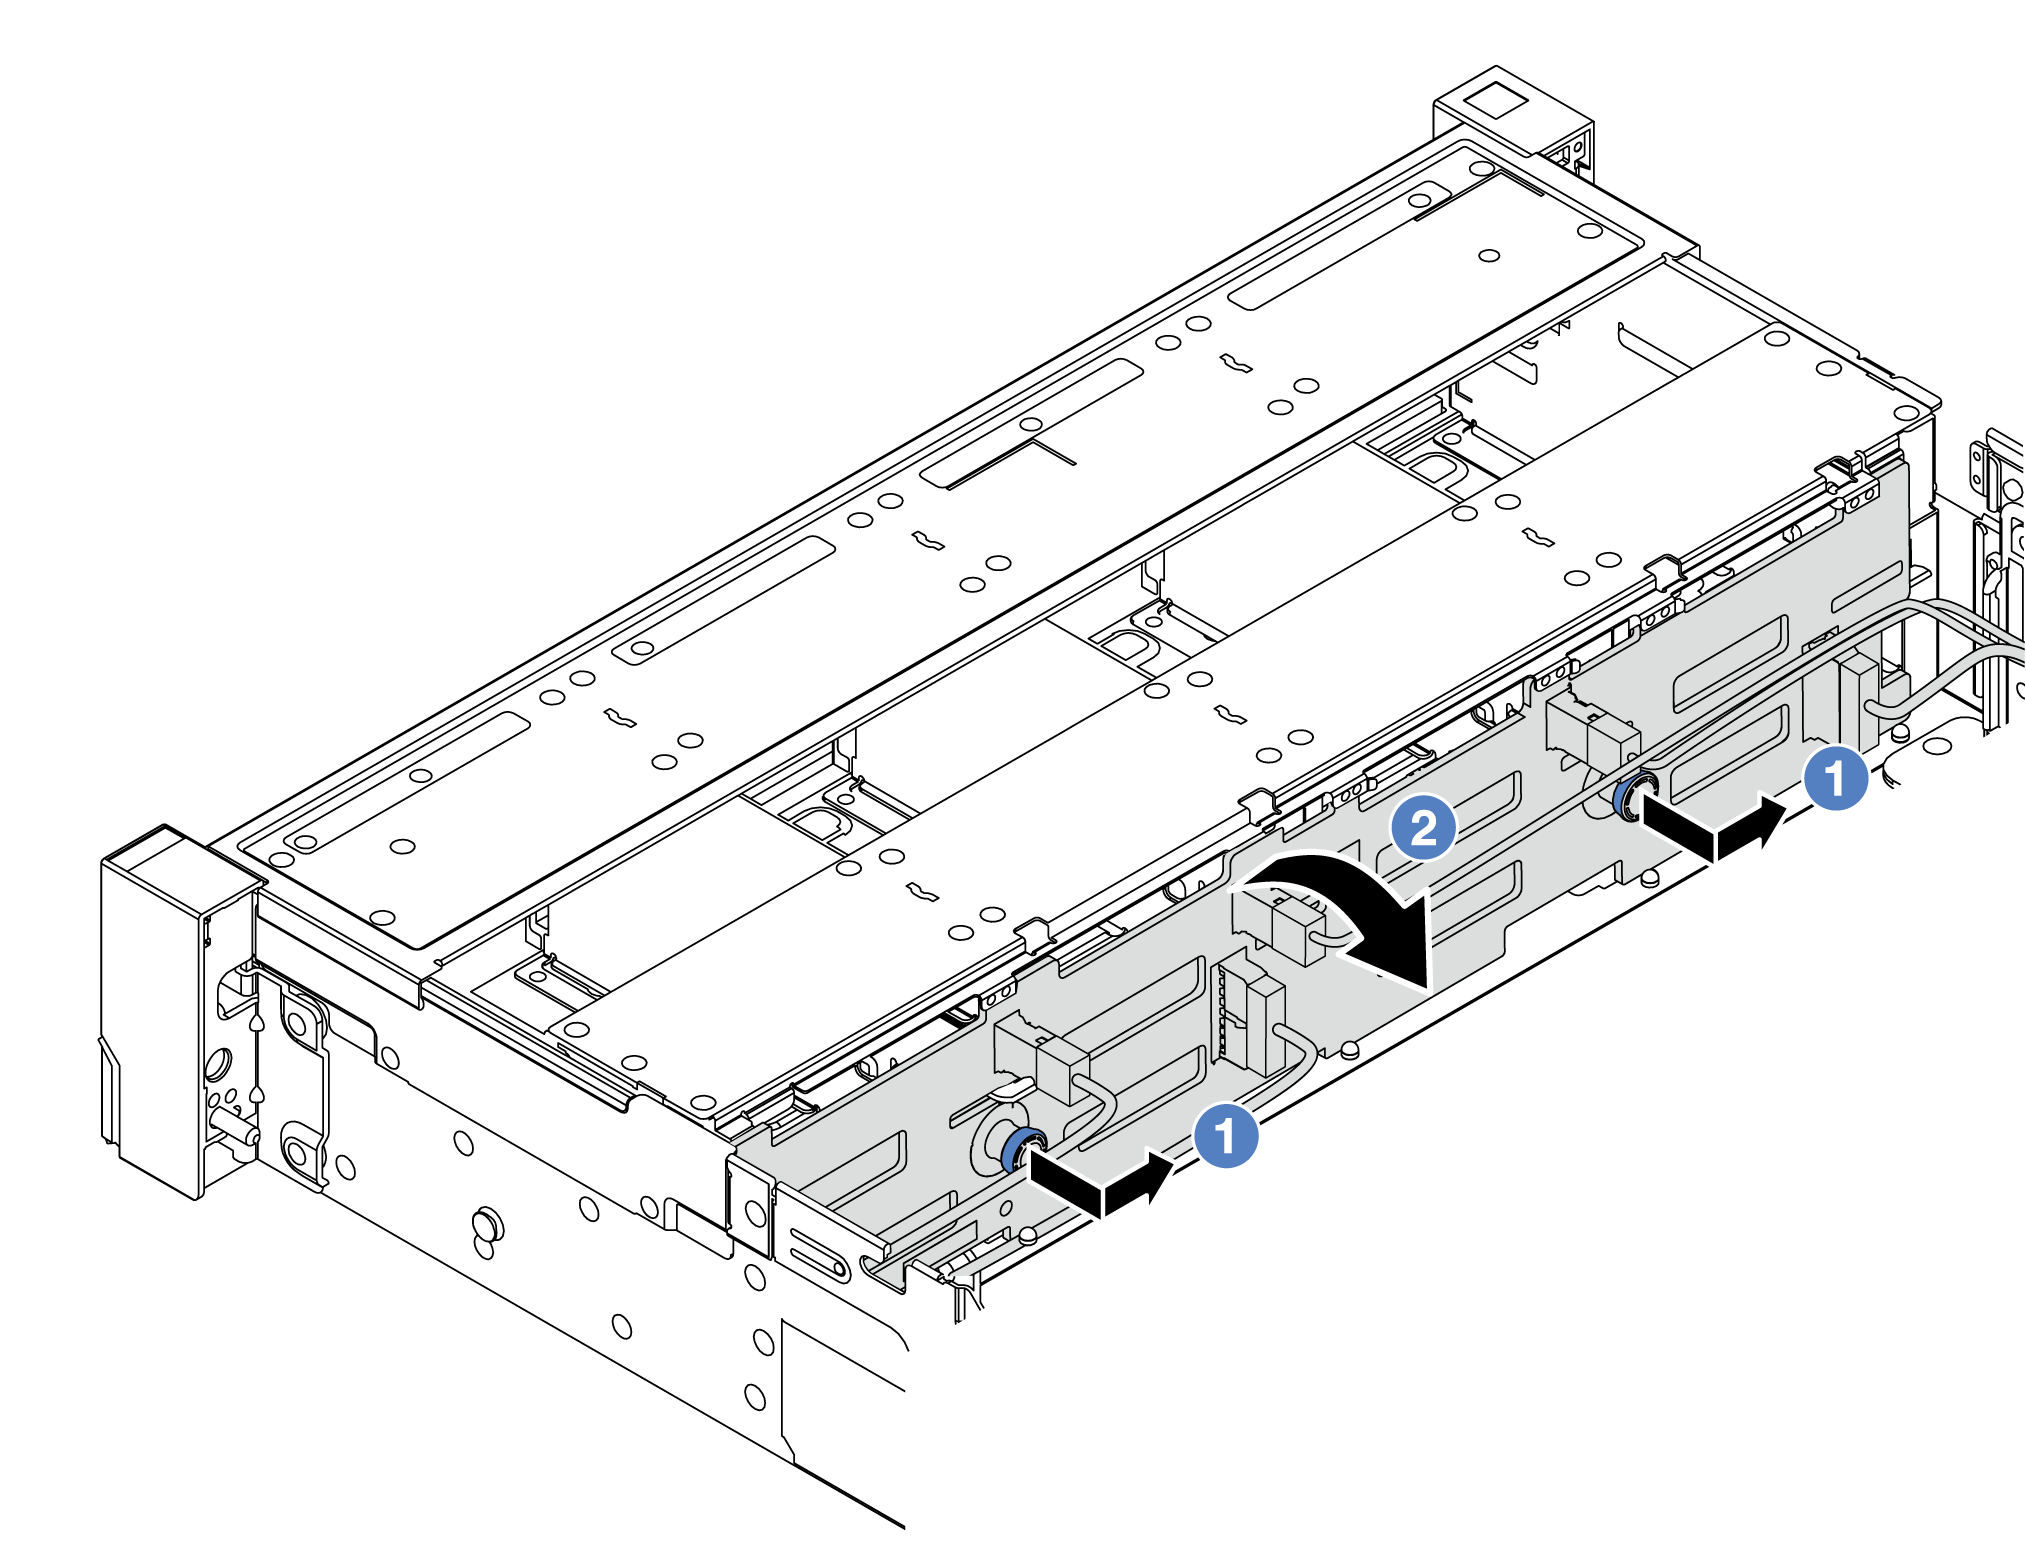 3.5-inch drive backplane removal